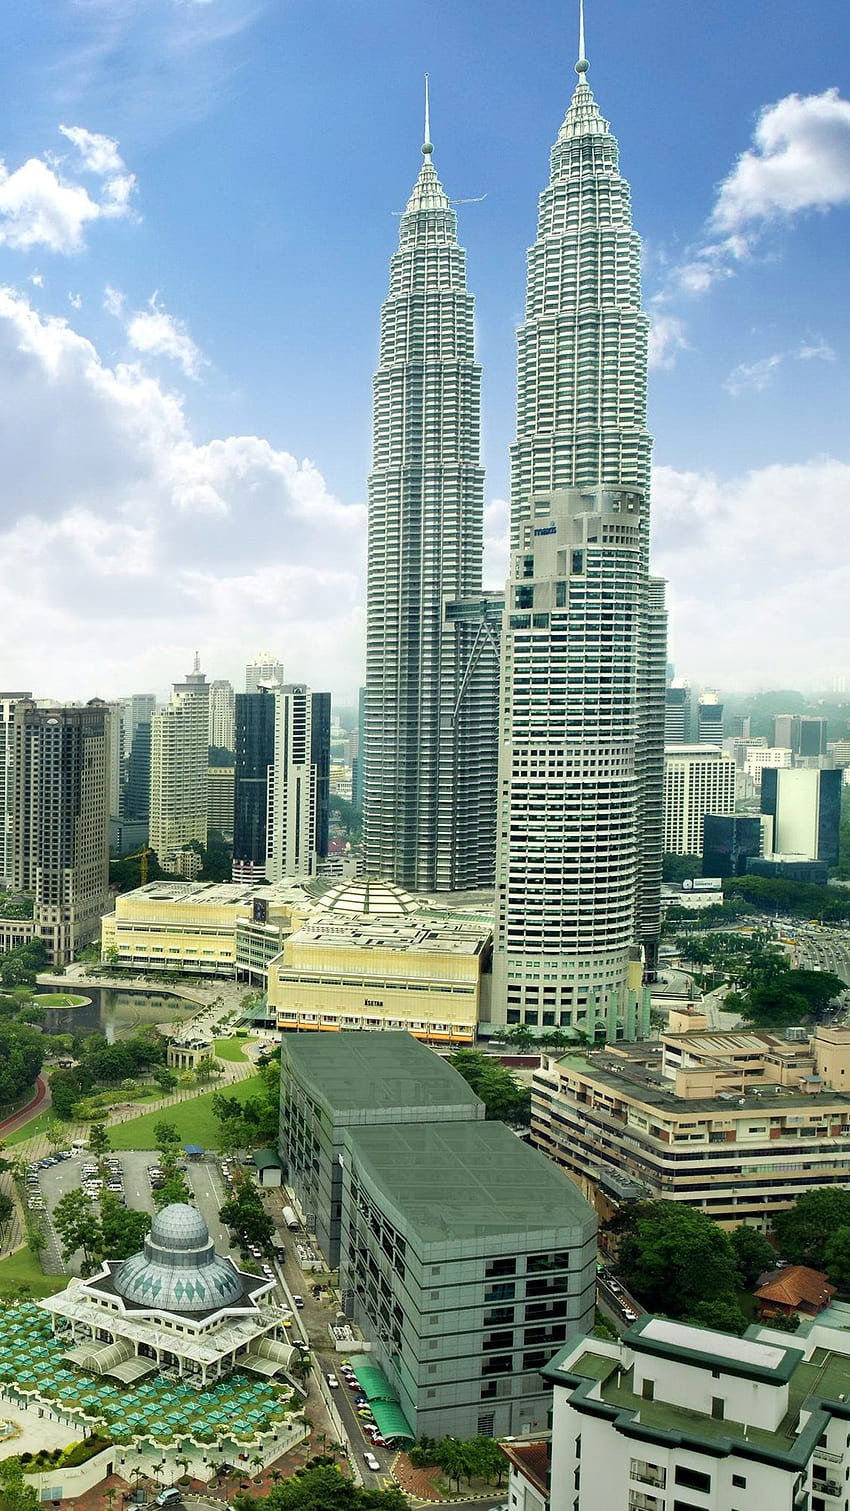 Kuala lumpur 4k ultra hd 16:10 wallpapers hd, desktop backgrounds  3840x2400, images and pictures